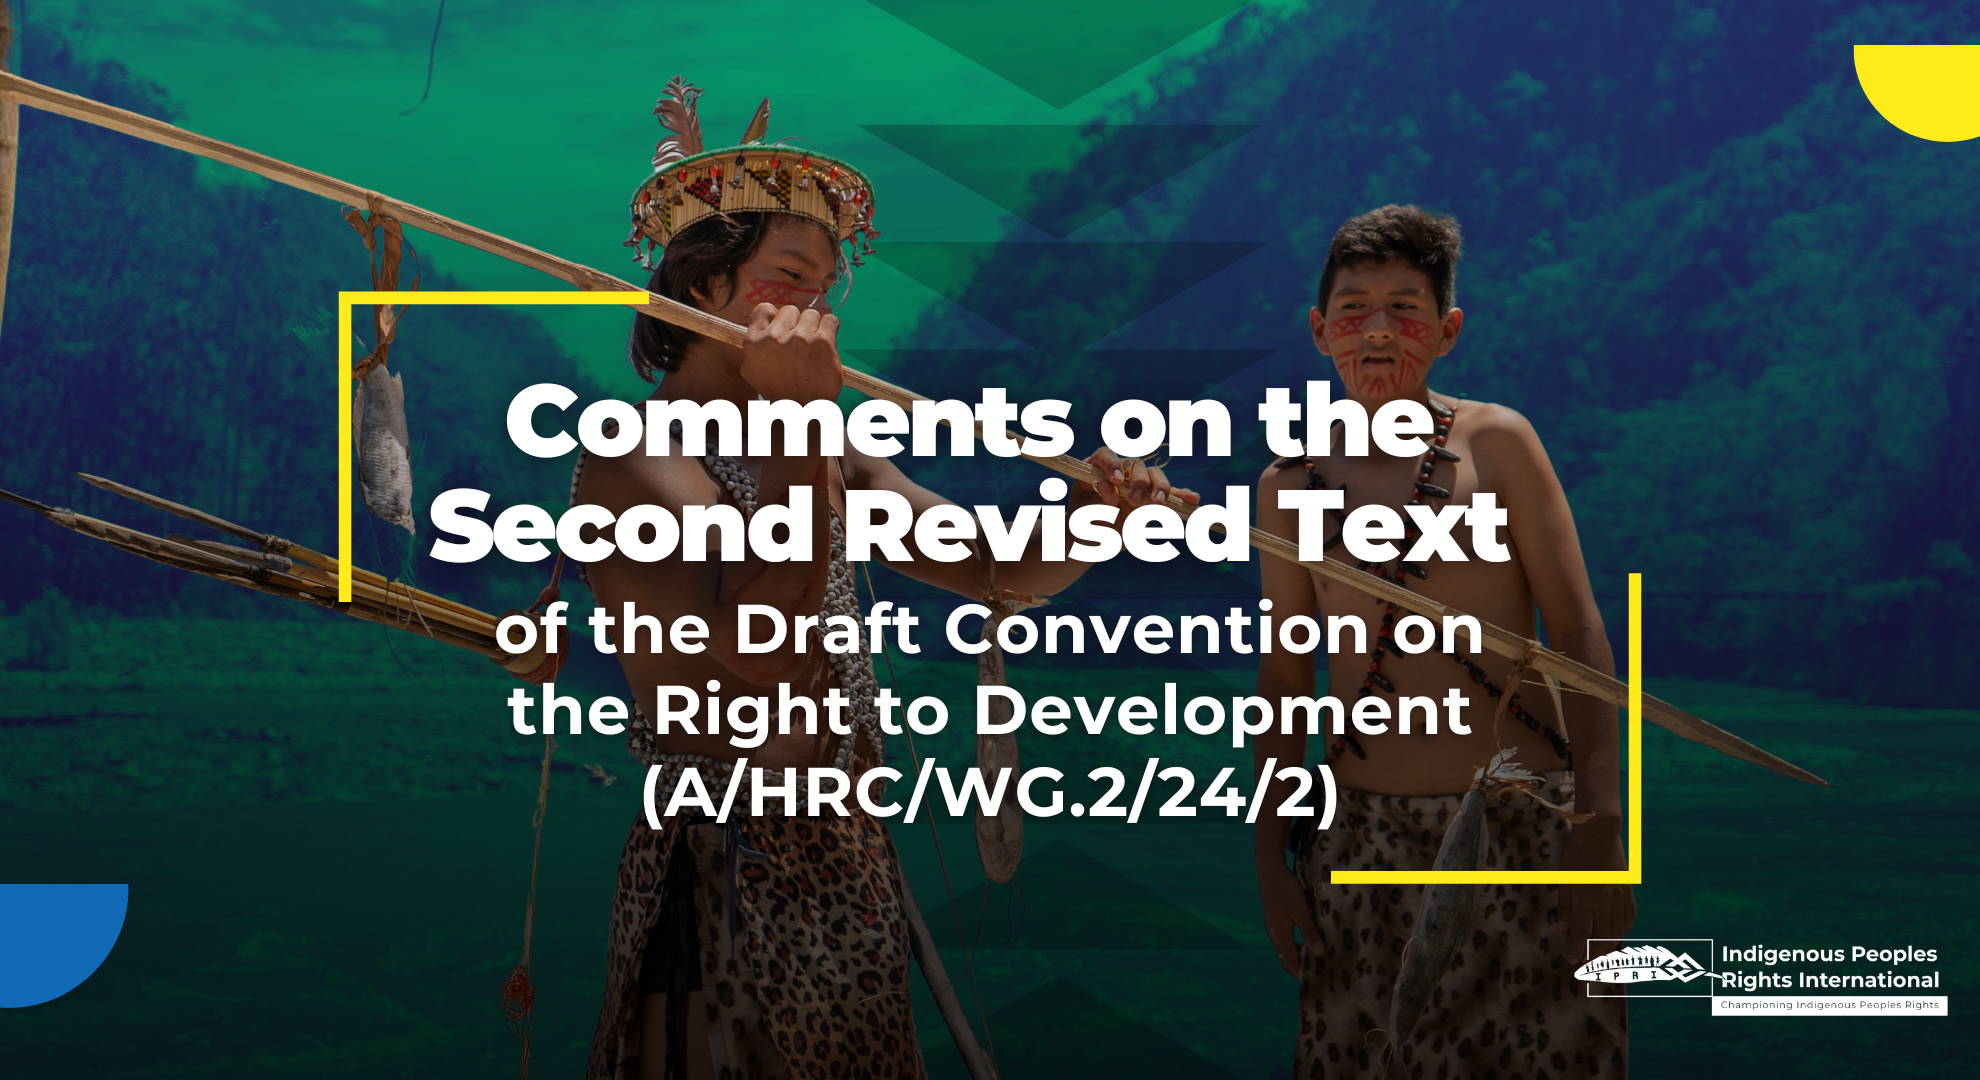 Comments on the Second Revised Text of the Draft Convention on the Right to Development (A/HRC/WG.2/24/2)